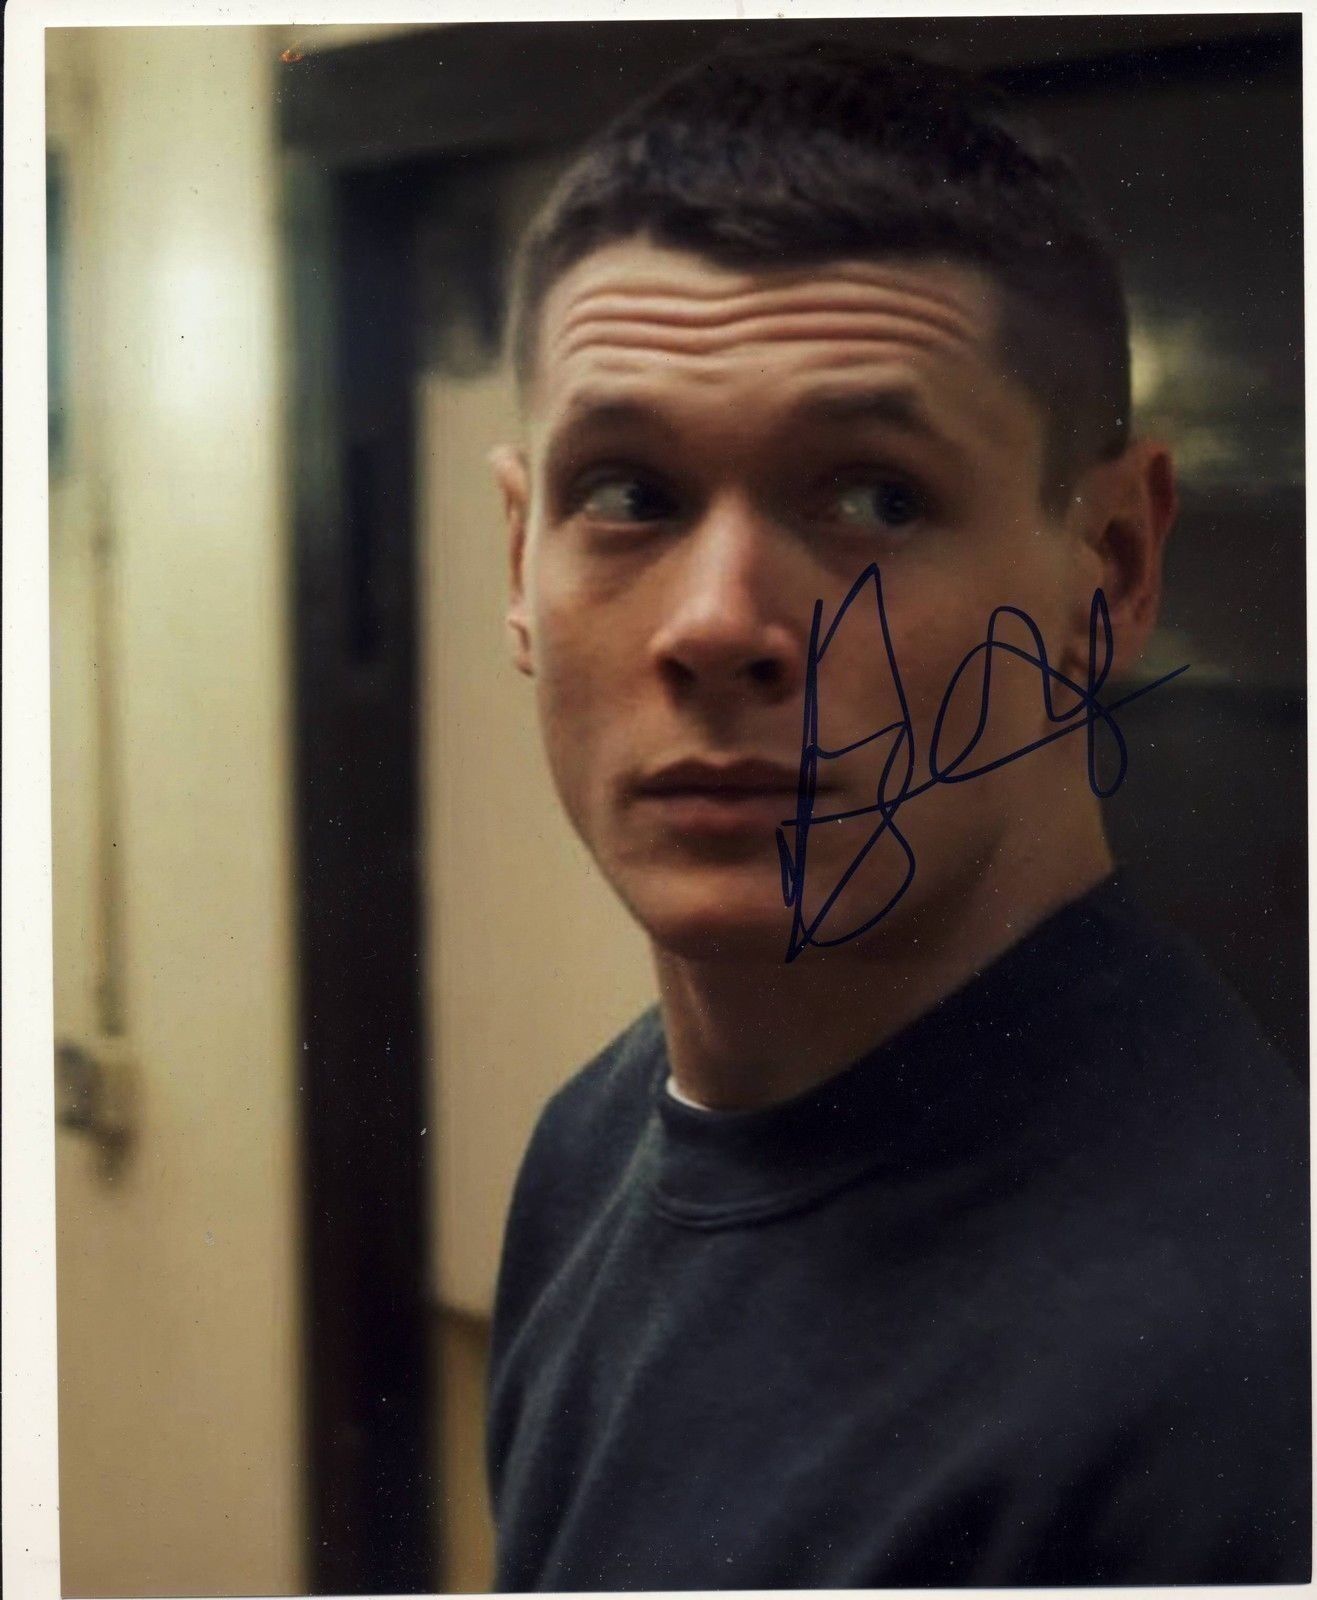 Jack O'Connell Autograph STARRED UP Signed 10x8 Photo Poster painting AFTAL [7419]